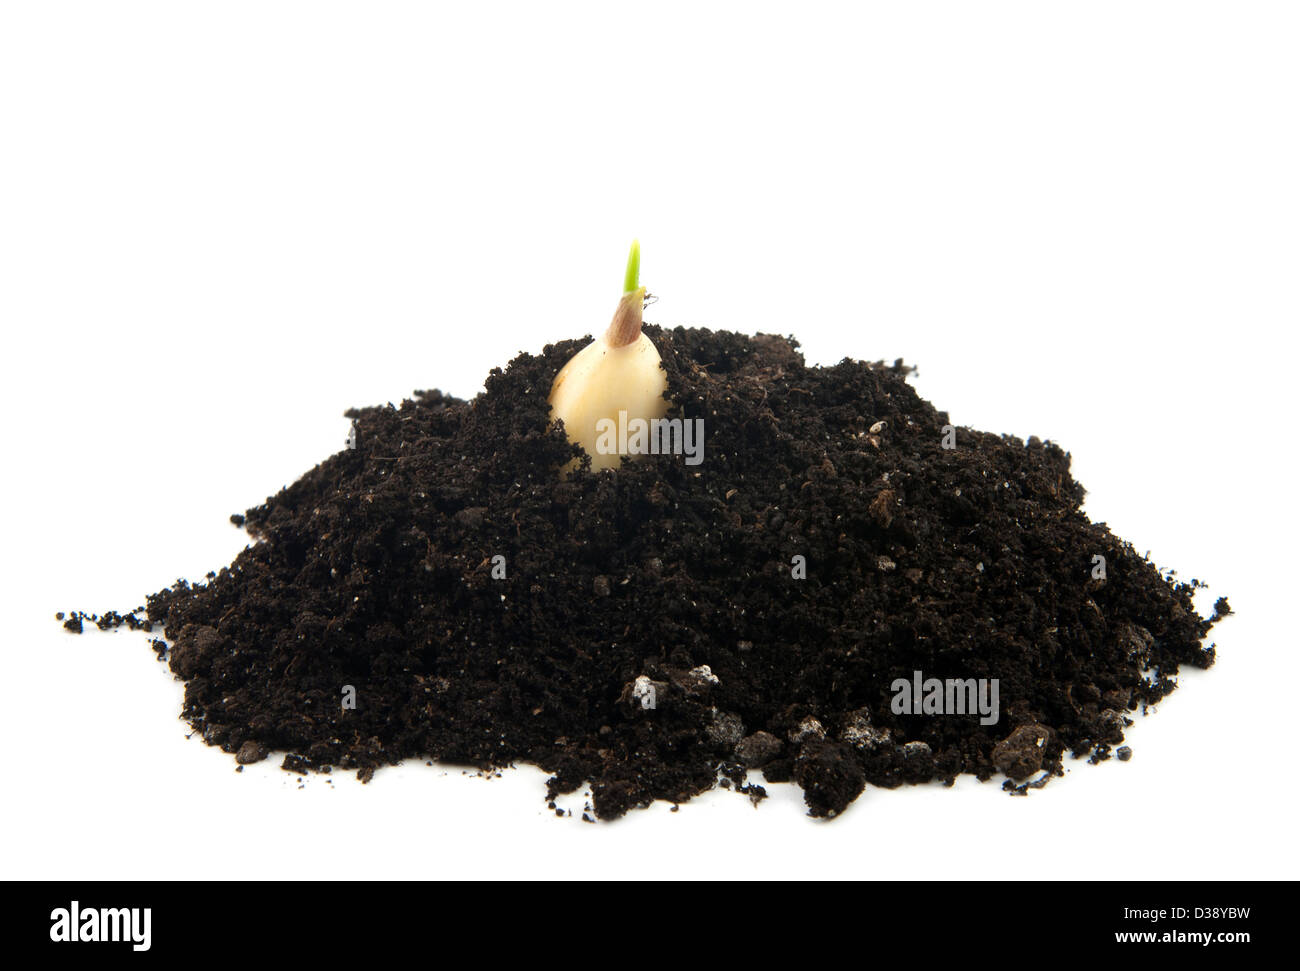 young plant of garlic in soil Stock Photo